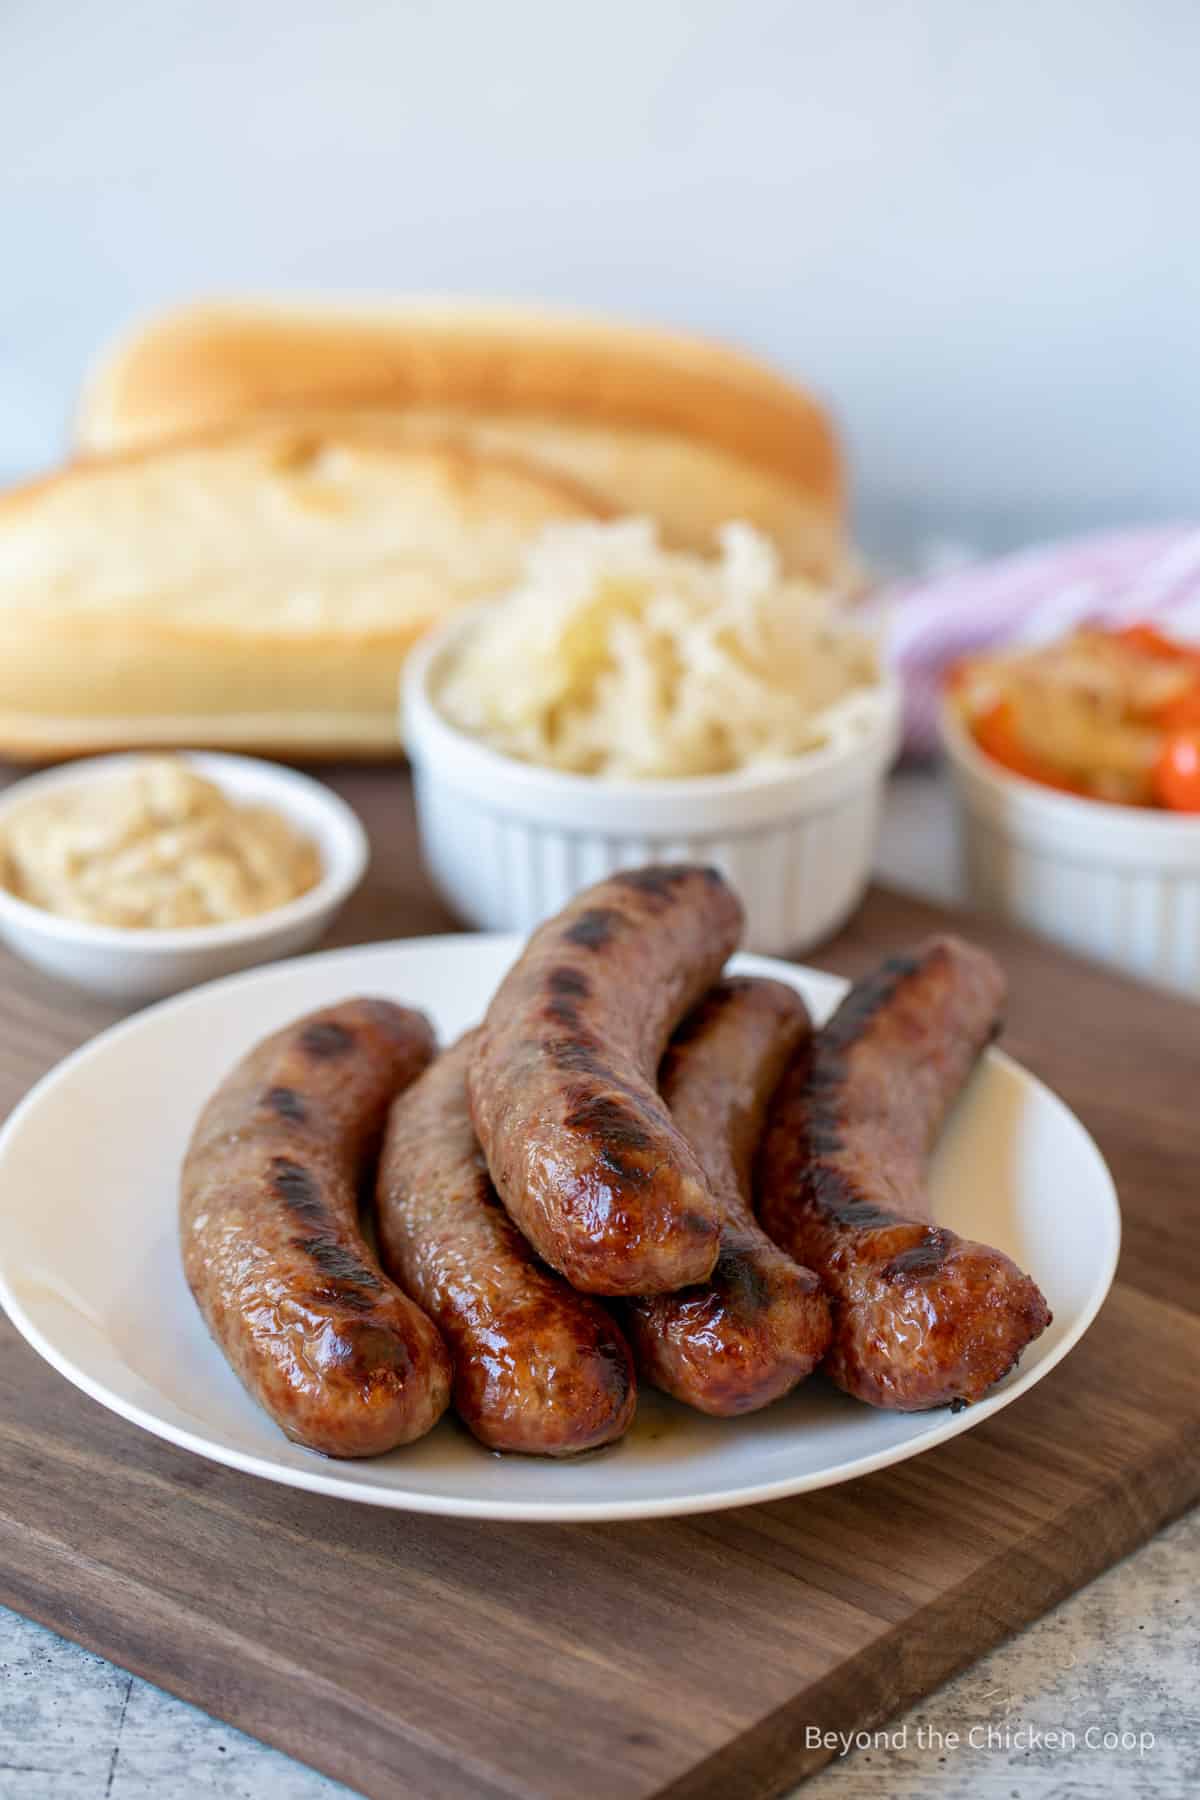 A plate full of cooked bratwurst sausages.